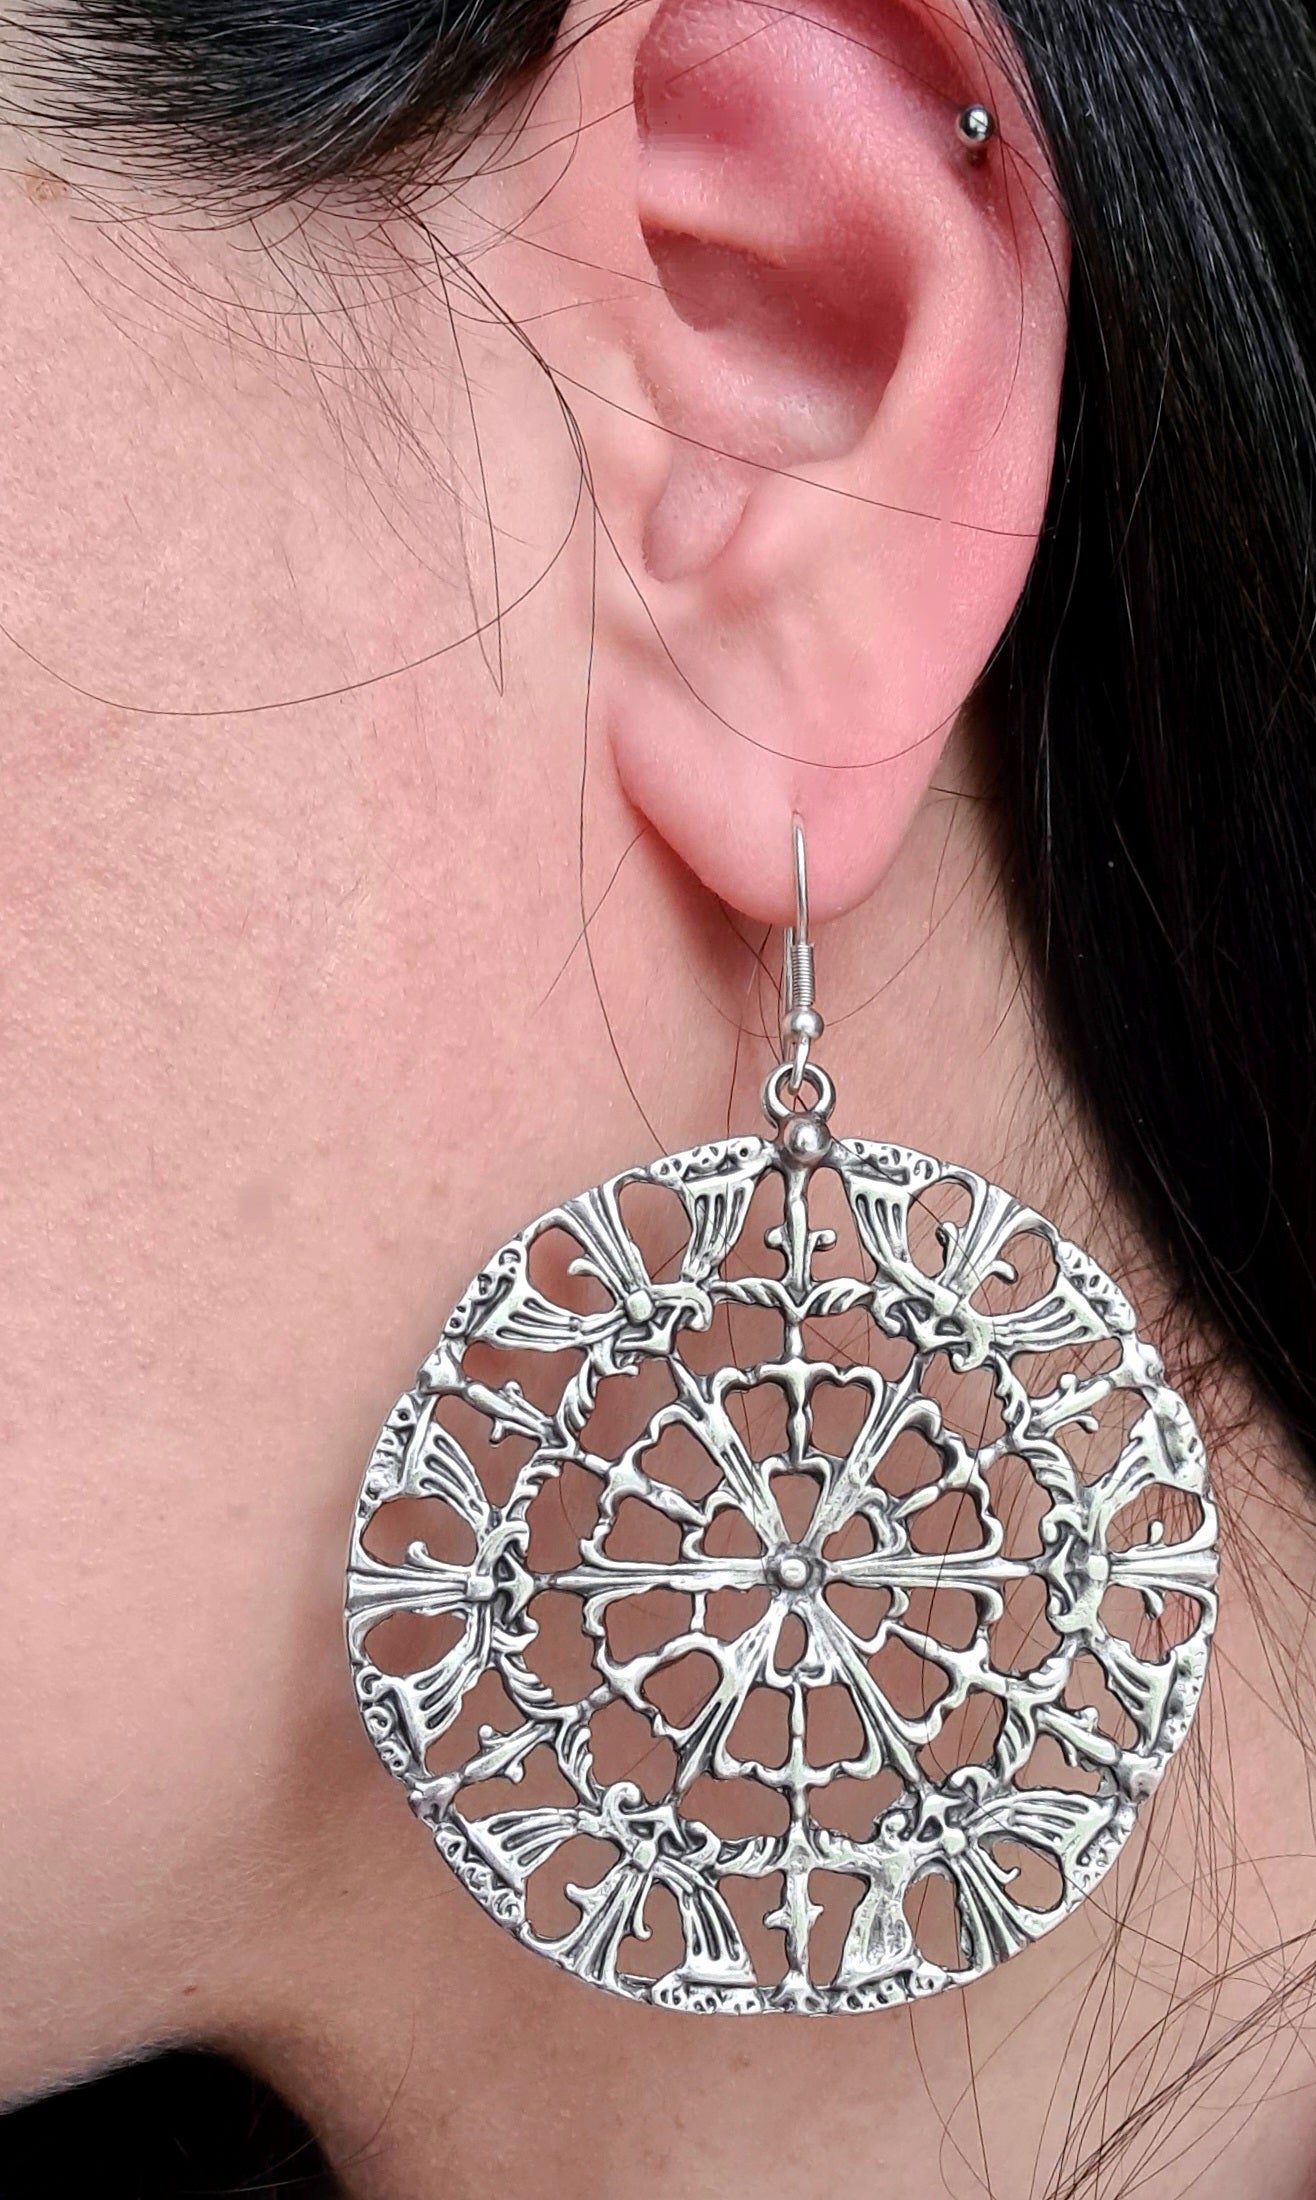 A woman wearing silver earrings. The earrings are small and delicate, and they have a circle design on them. The earrings are on the woman's ears, and they are reflecting the light.